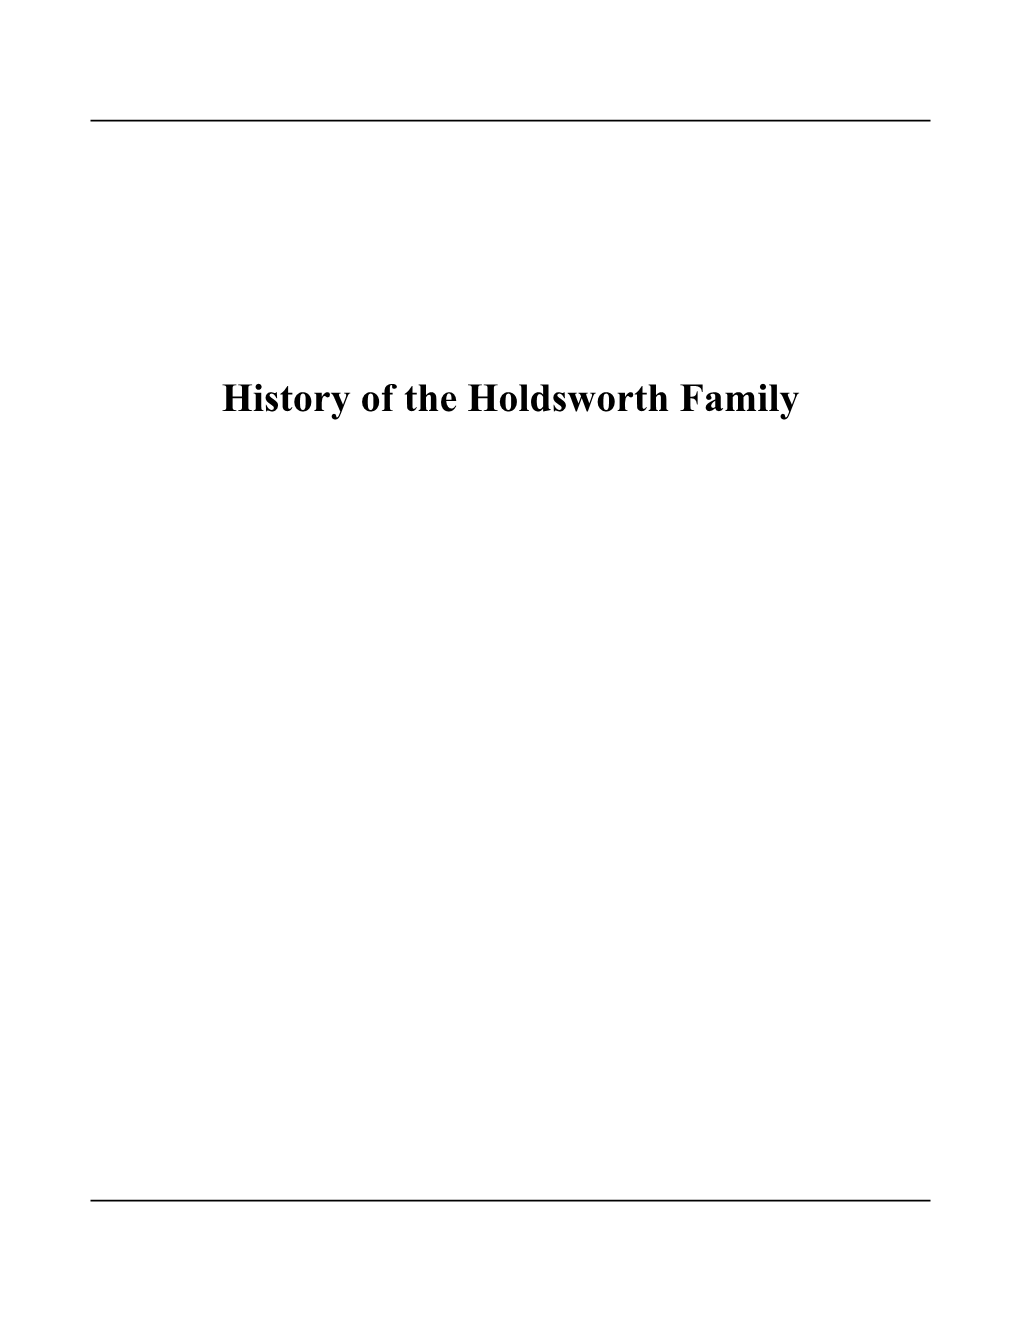 History of the Holdsworth Family Contents